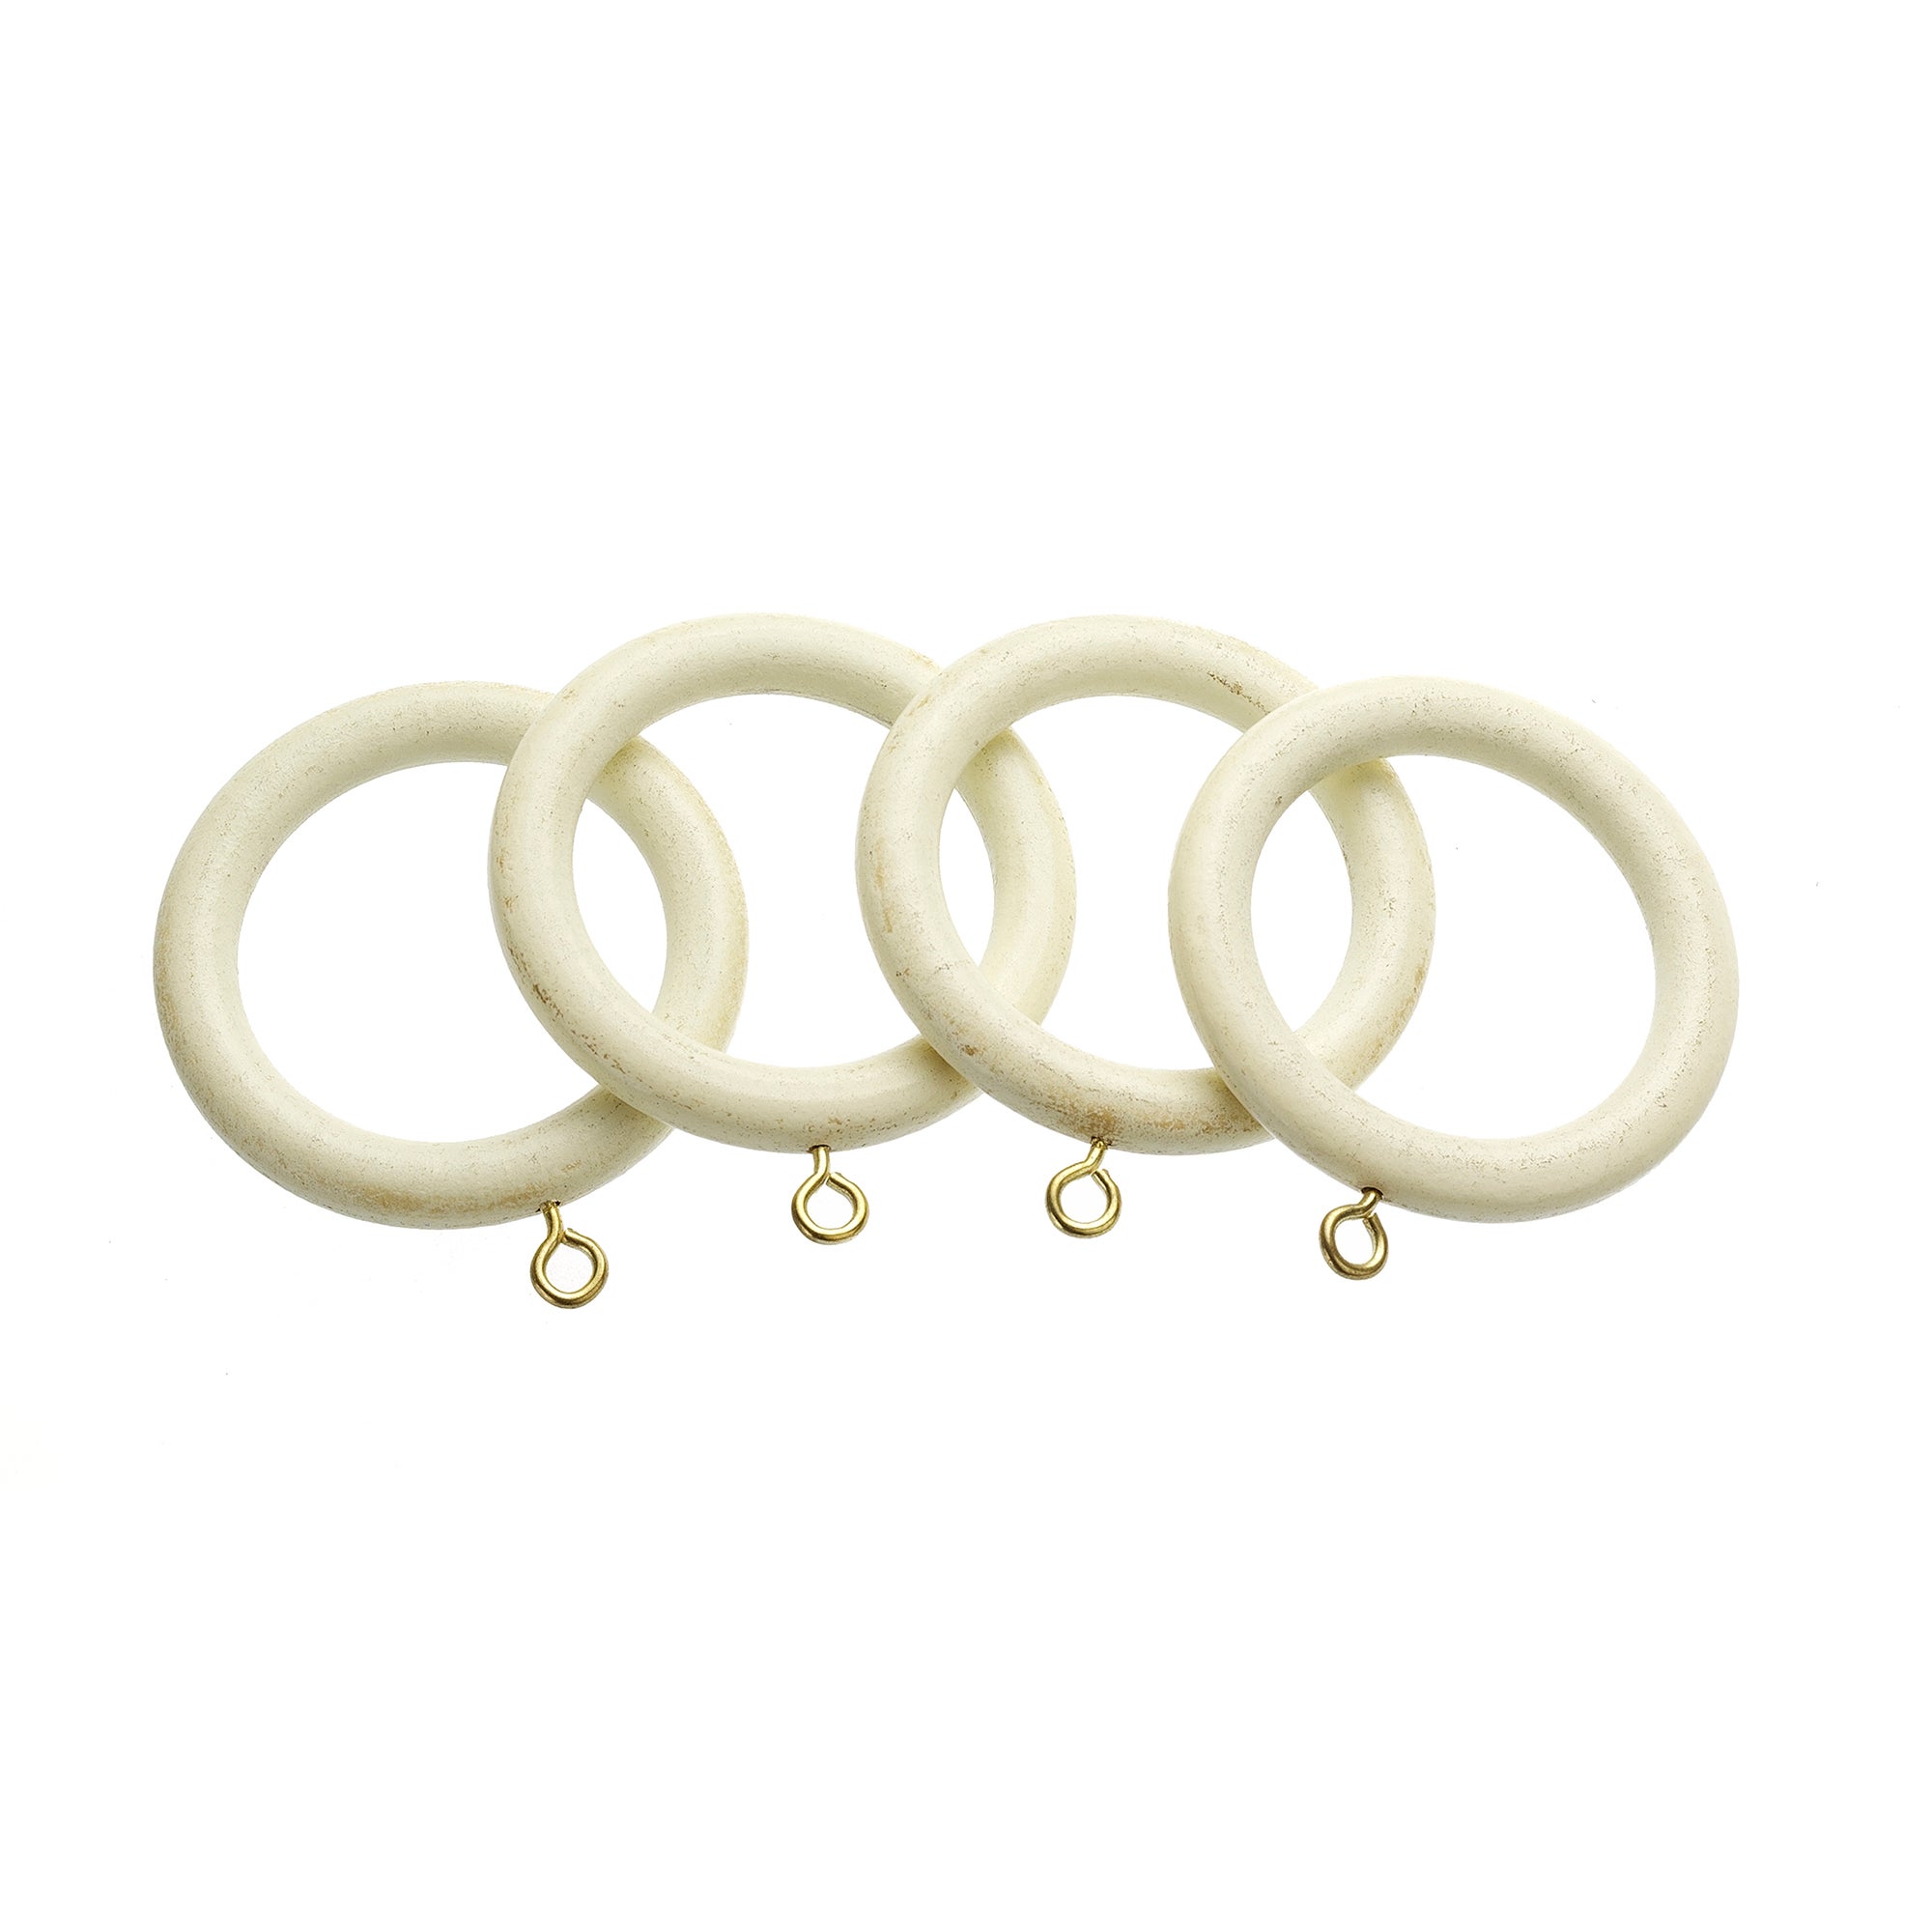 Antique White Swish Cambridge Collection Pack of 4 Curtain Rings Dunelm